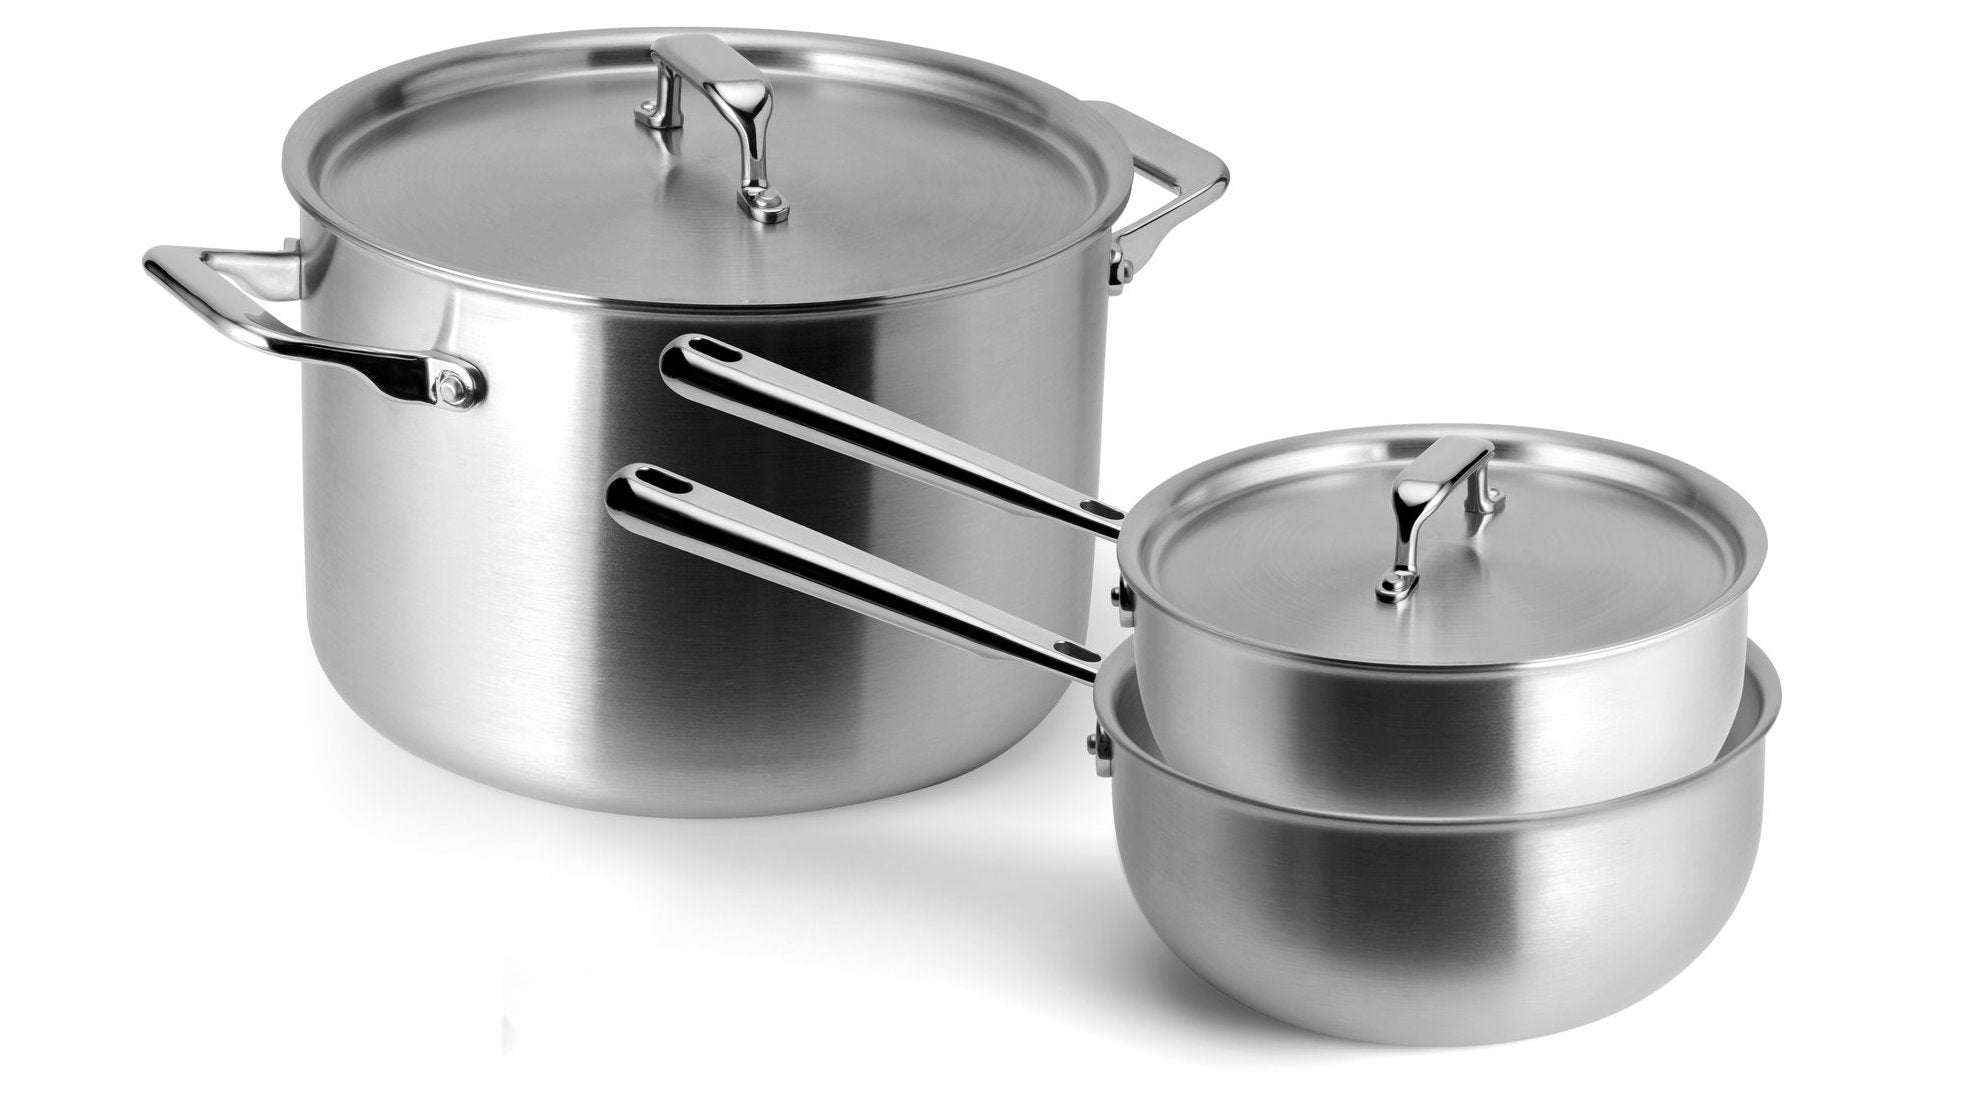 Consumer Reports Best Cookware For Glass Top Stove